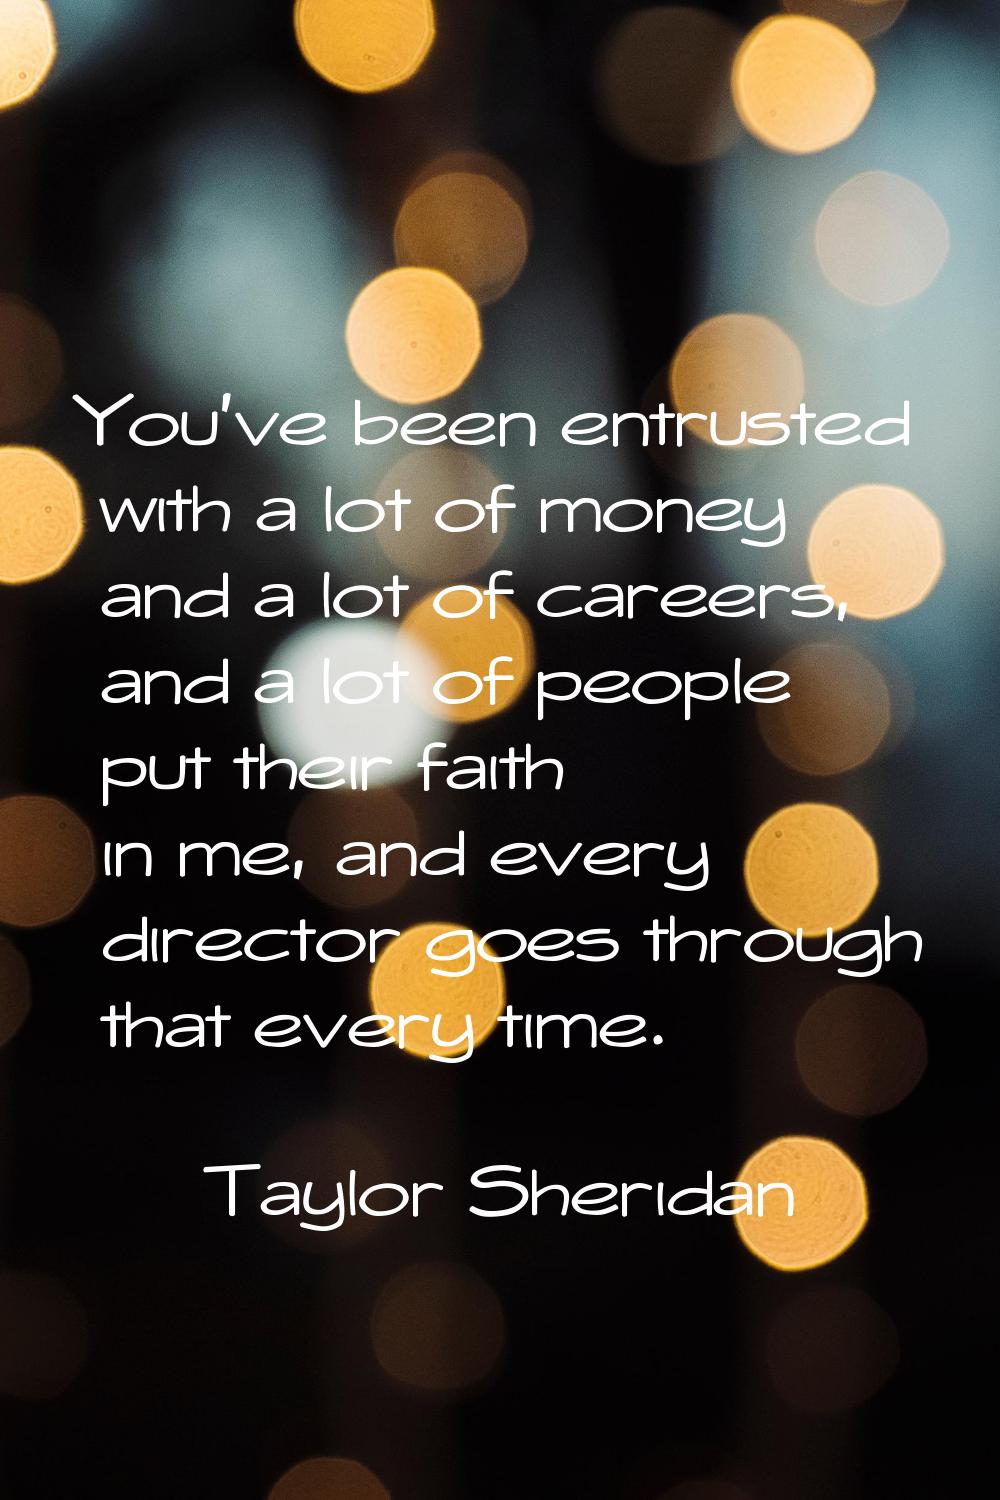 You've been entrusted with a lot of money and a lot of careers, and a lot of people put their faith